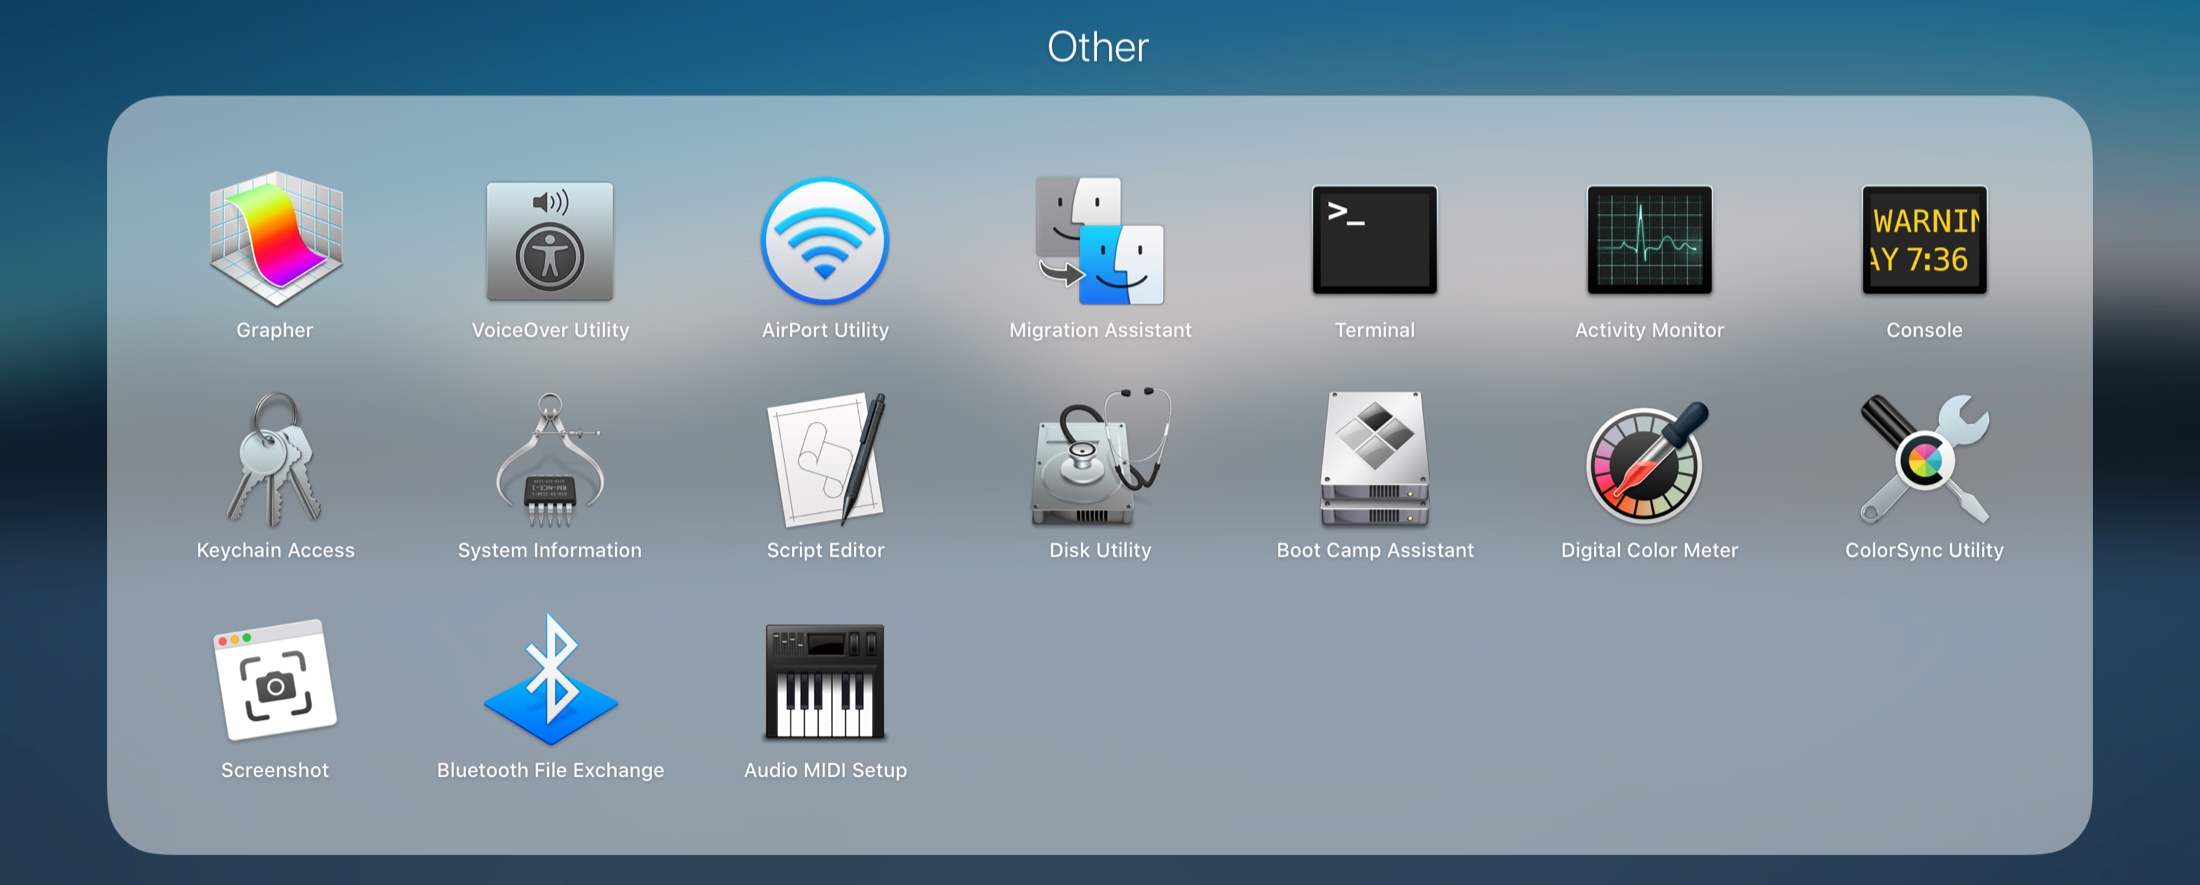 macOS Other Folder in Launchpad